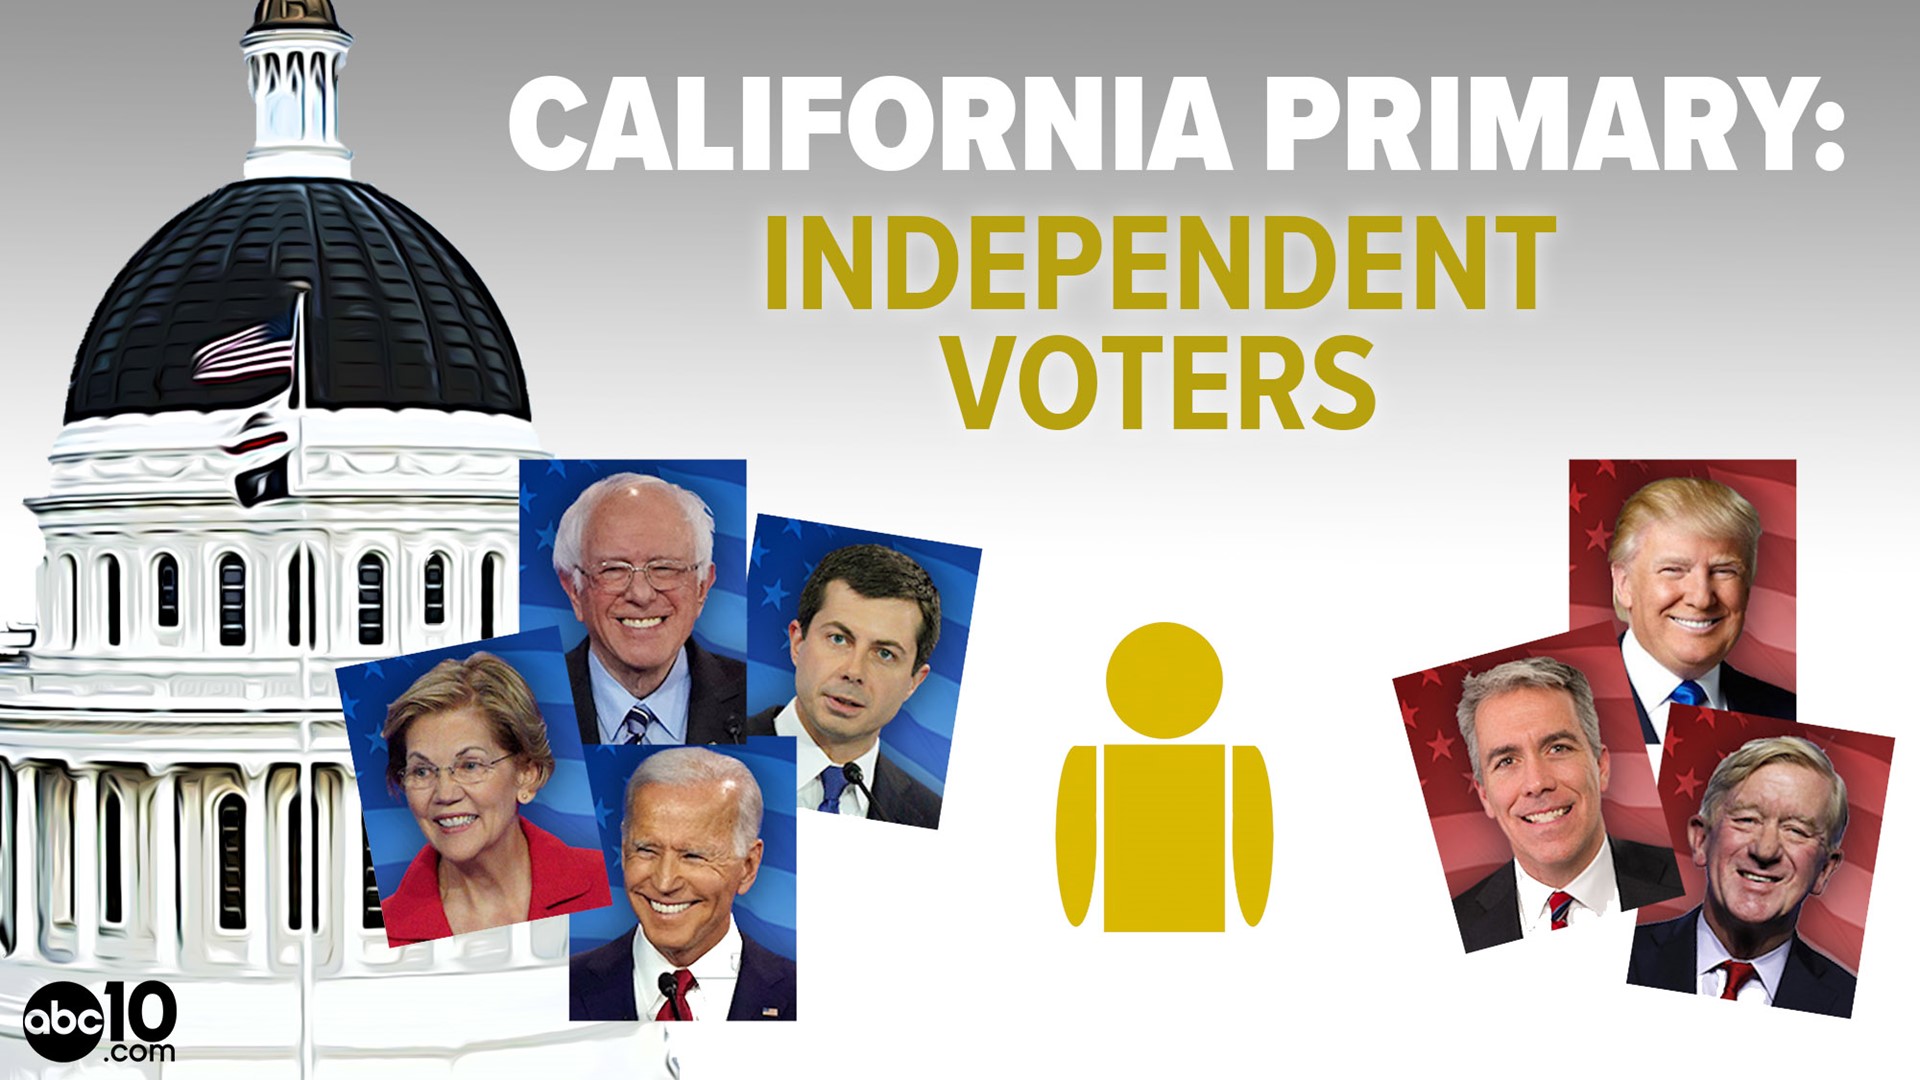 The California primary is Tuesday March 3, 2020.  Brandon Rittiman explains what independents need to know before Super Tuesday.